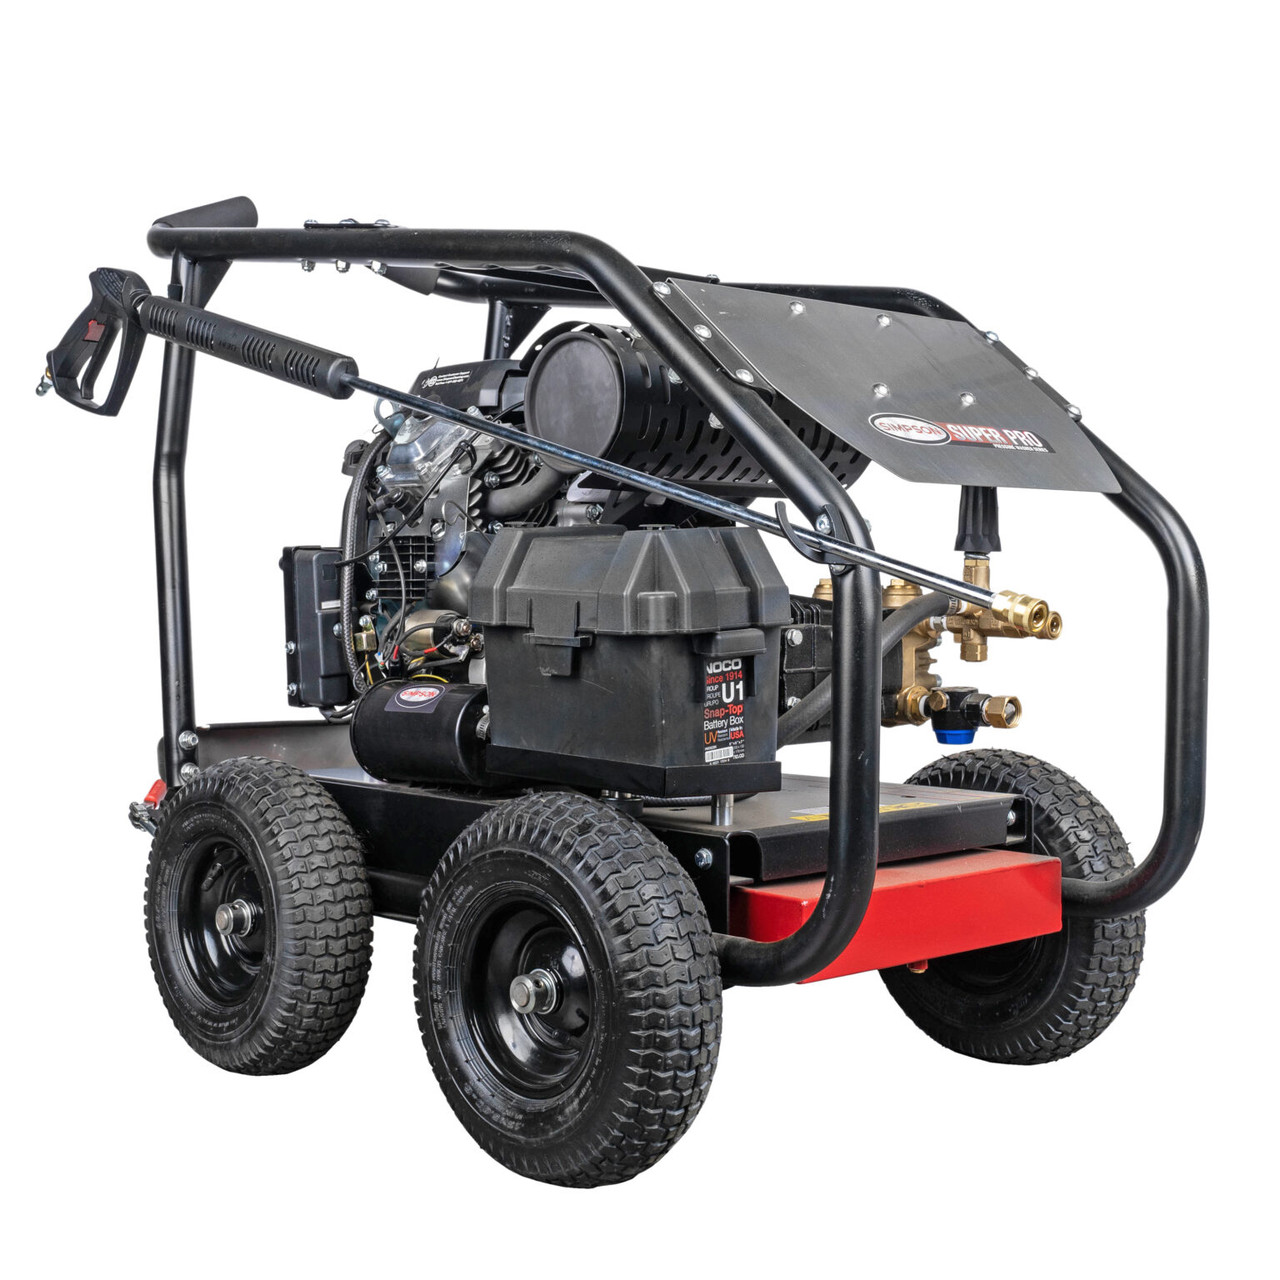 SIMPSON SuperPro Roll-Cage SW4060SUGL Gas Pressure Washer 4000 PSI at 6.0 GPM